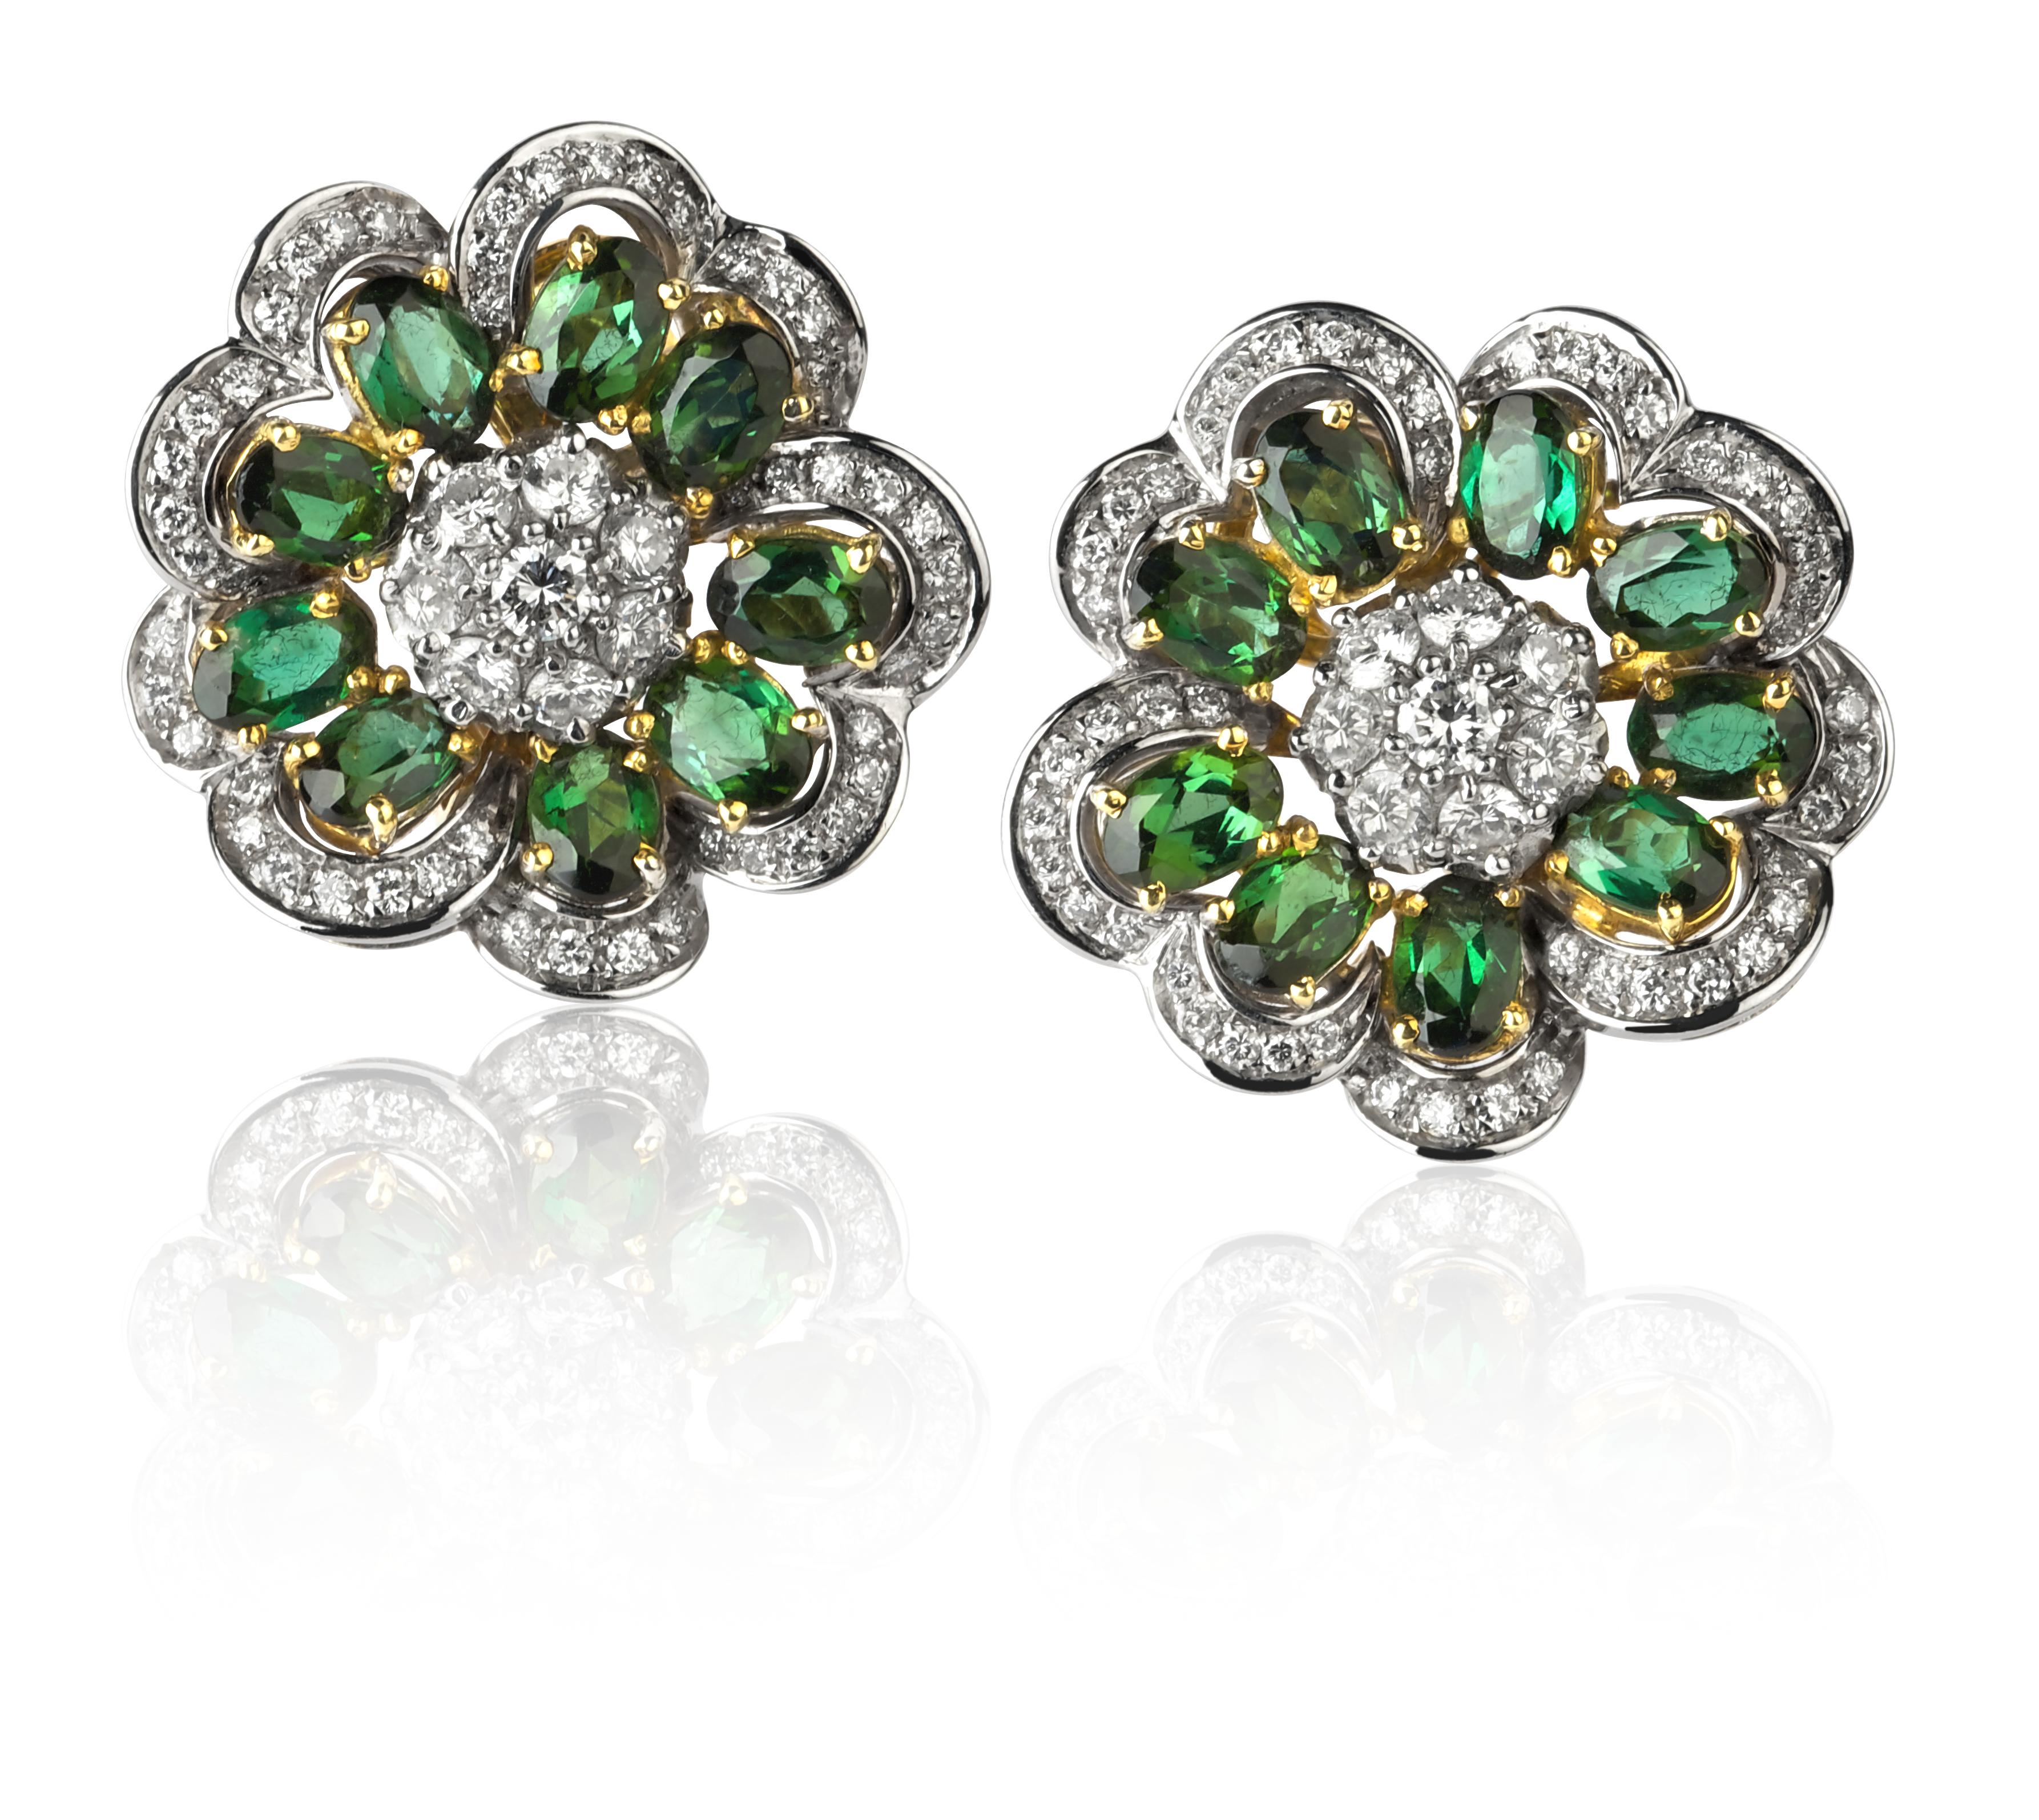 Vintage Earrings from ANGELETTI PRIVATE COLLECTION White and Yellow gold with Green Tourmaline and Diamonds.
These Earrings were manufactured in ‘60s in Italy by expert Goldsmith from Lombardia.
The Tone of the Green Stones make these Earrings a